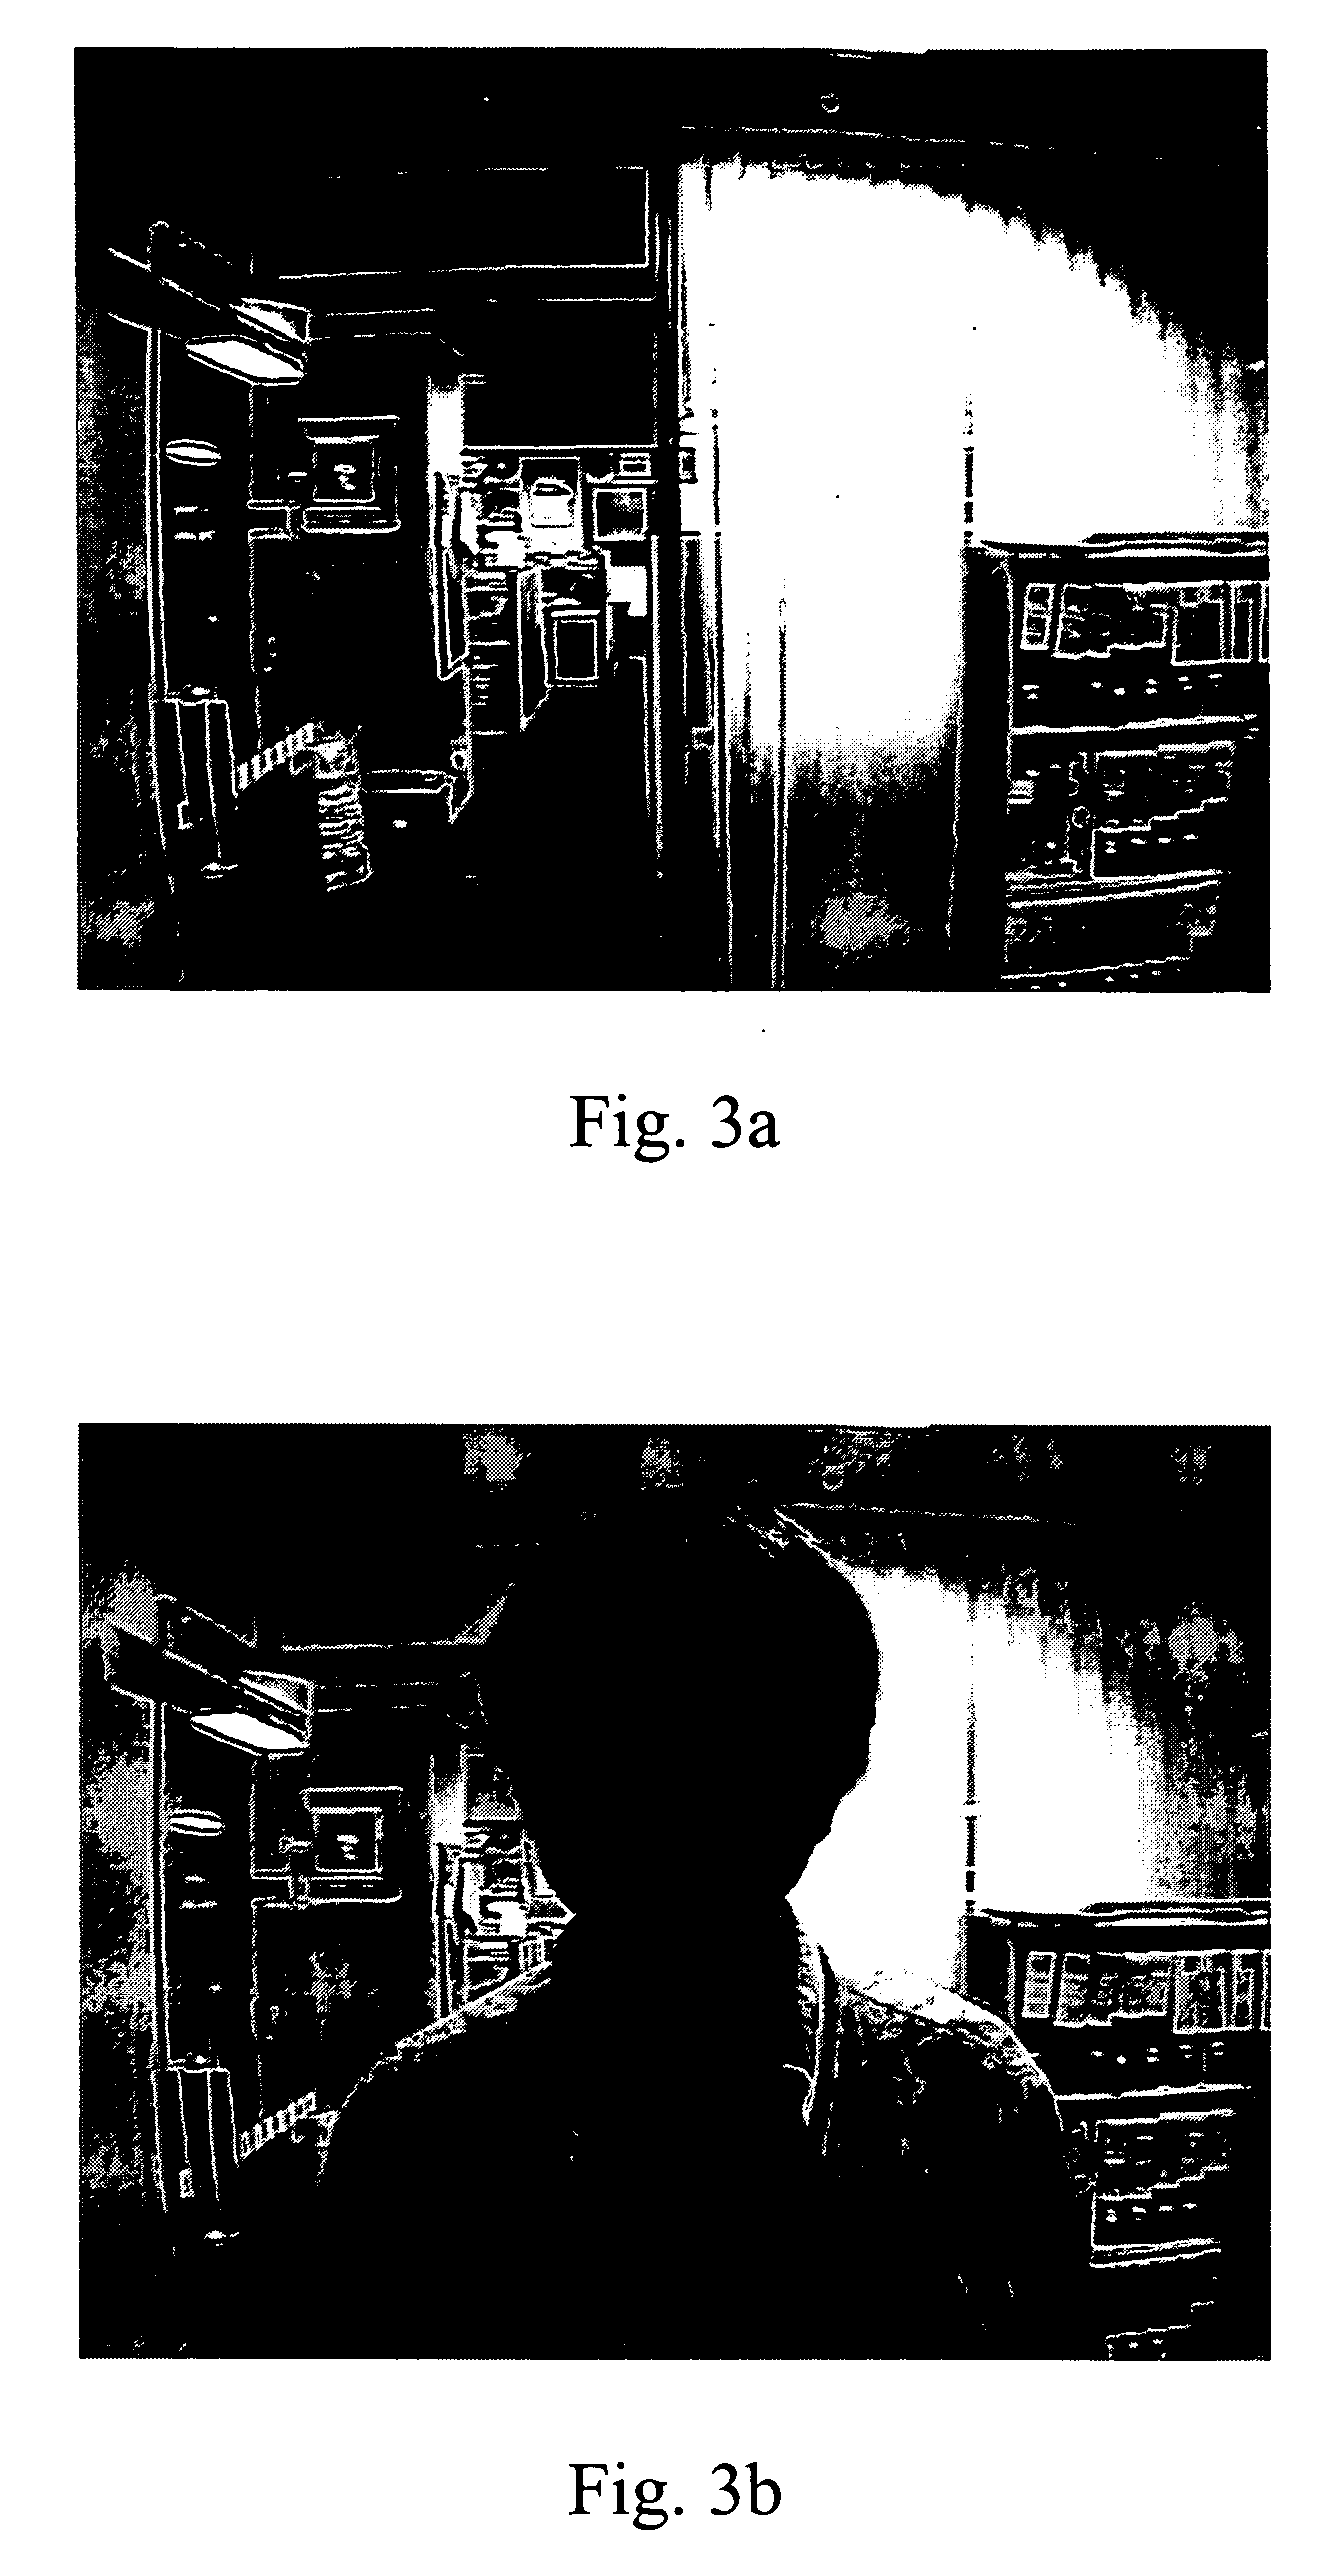 Method for identifying a person from a detected eye image